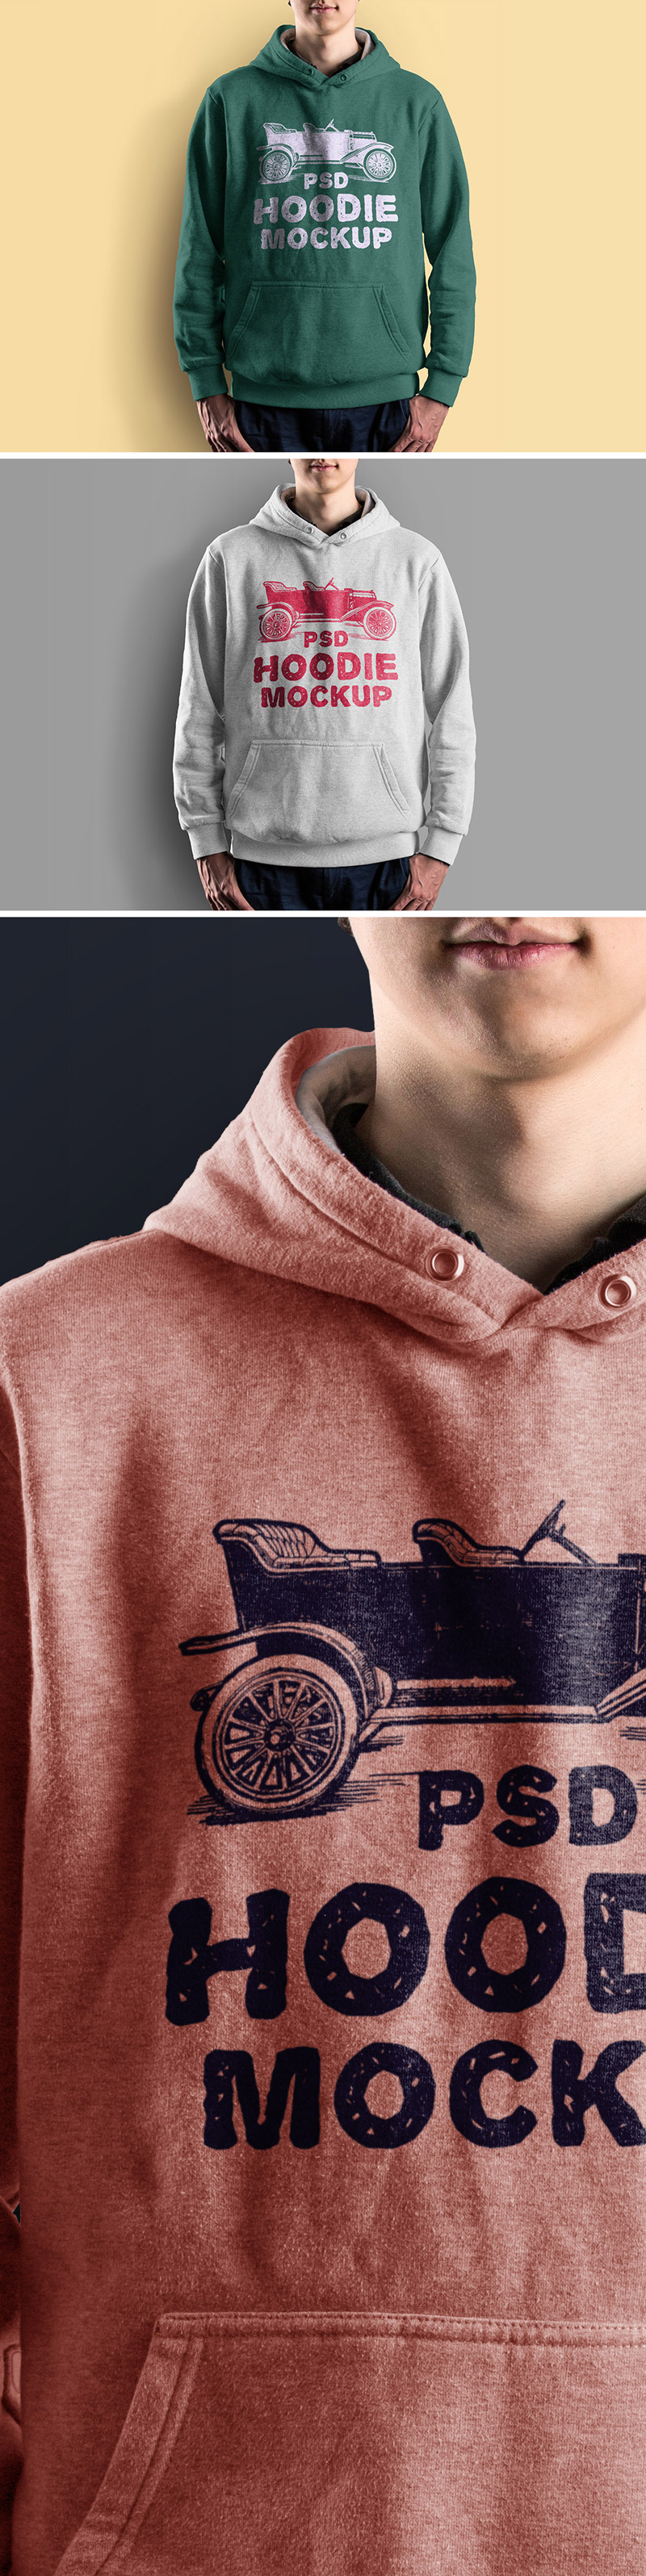 Hoodie Mockup by Graphicsfuel on Dribbble